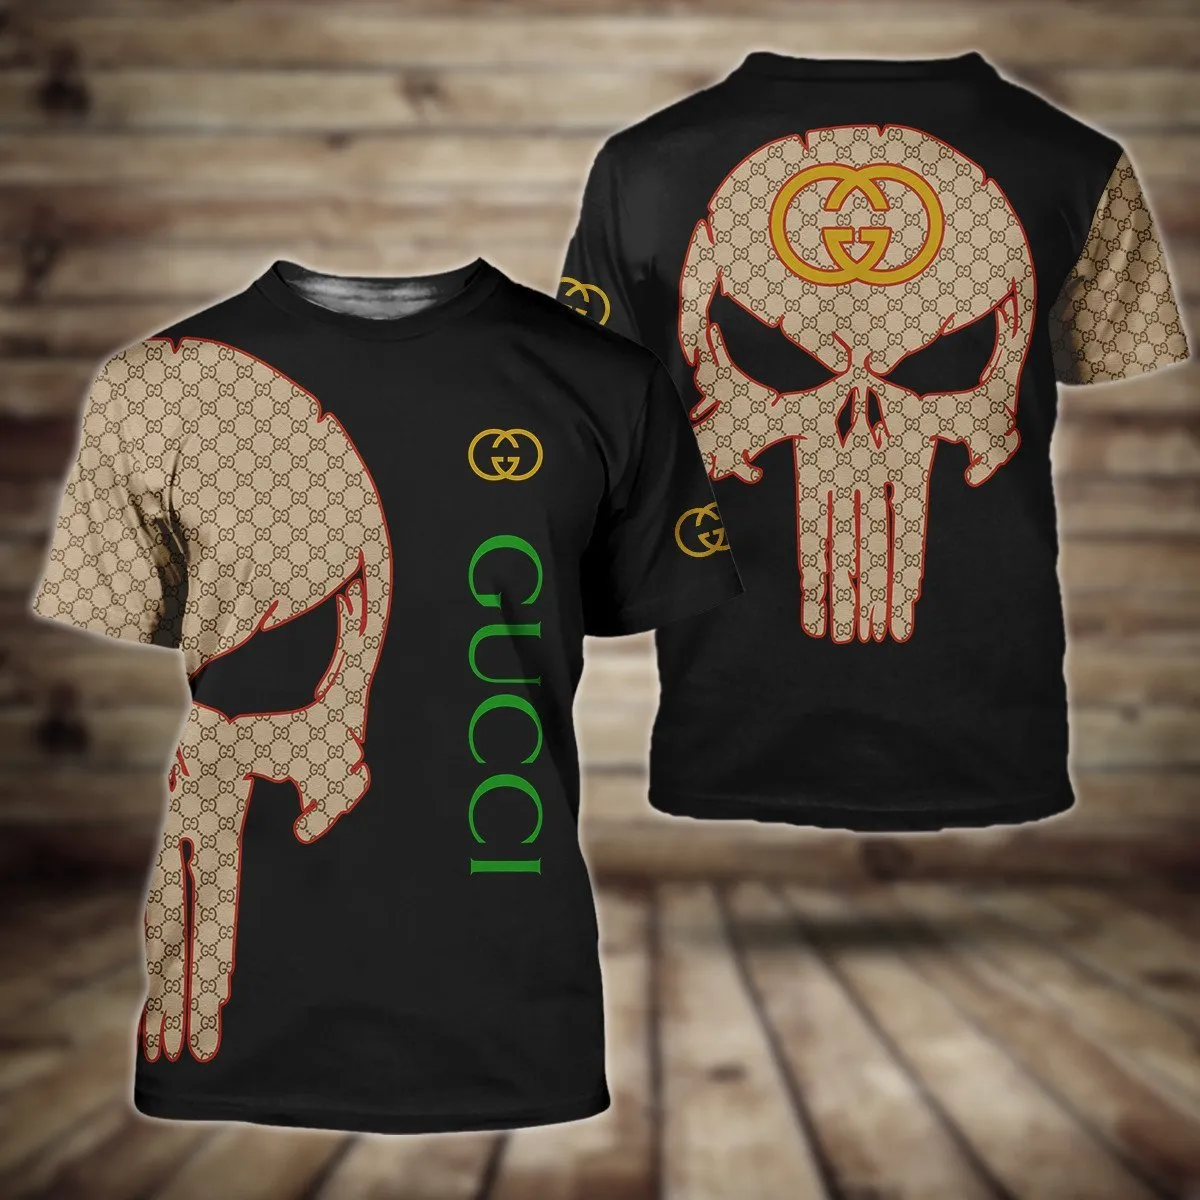 Gucci Skull T Shirt Outfit Luxury Fashion